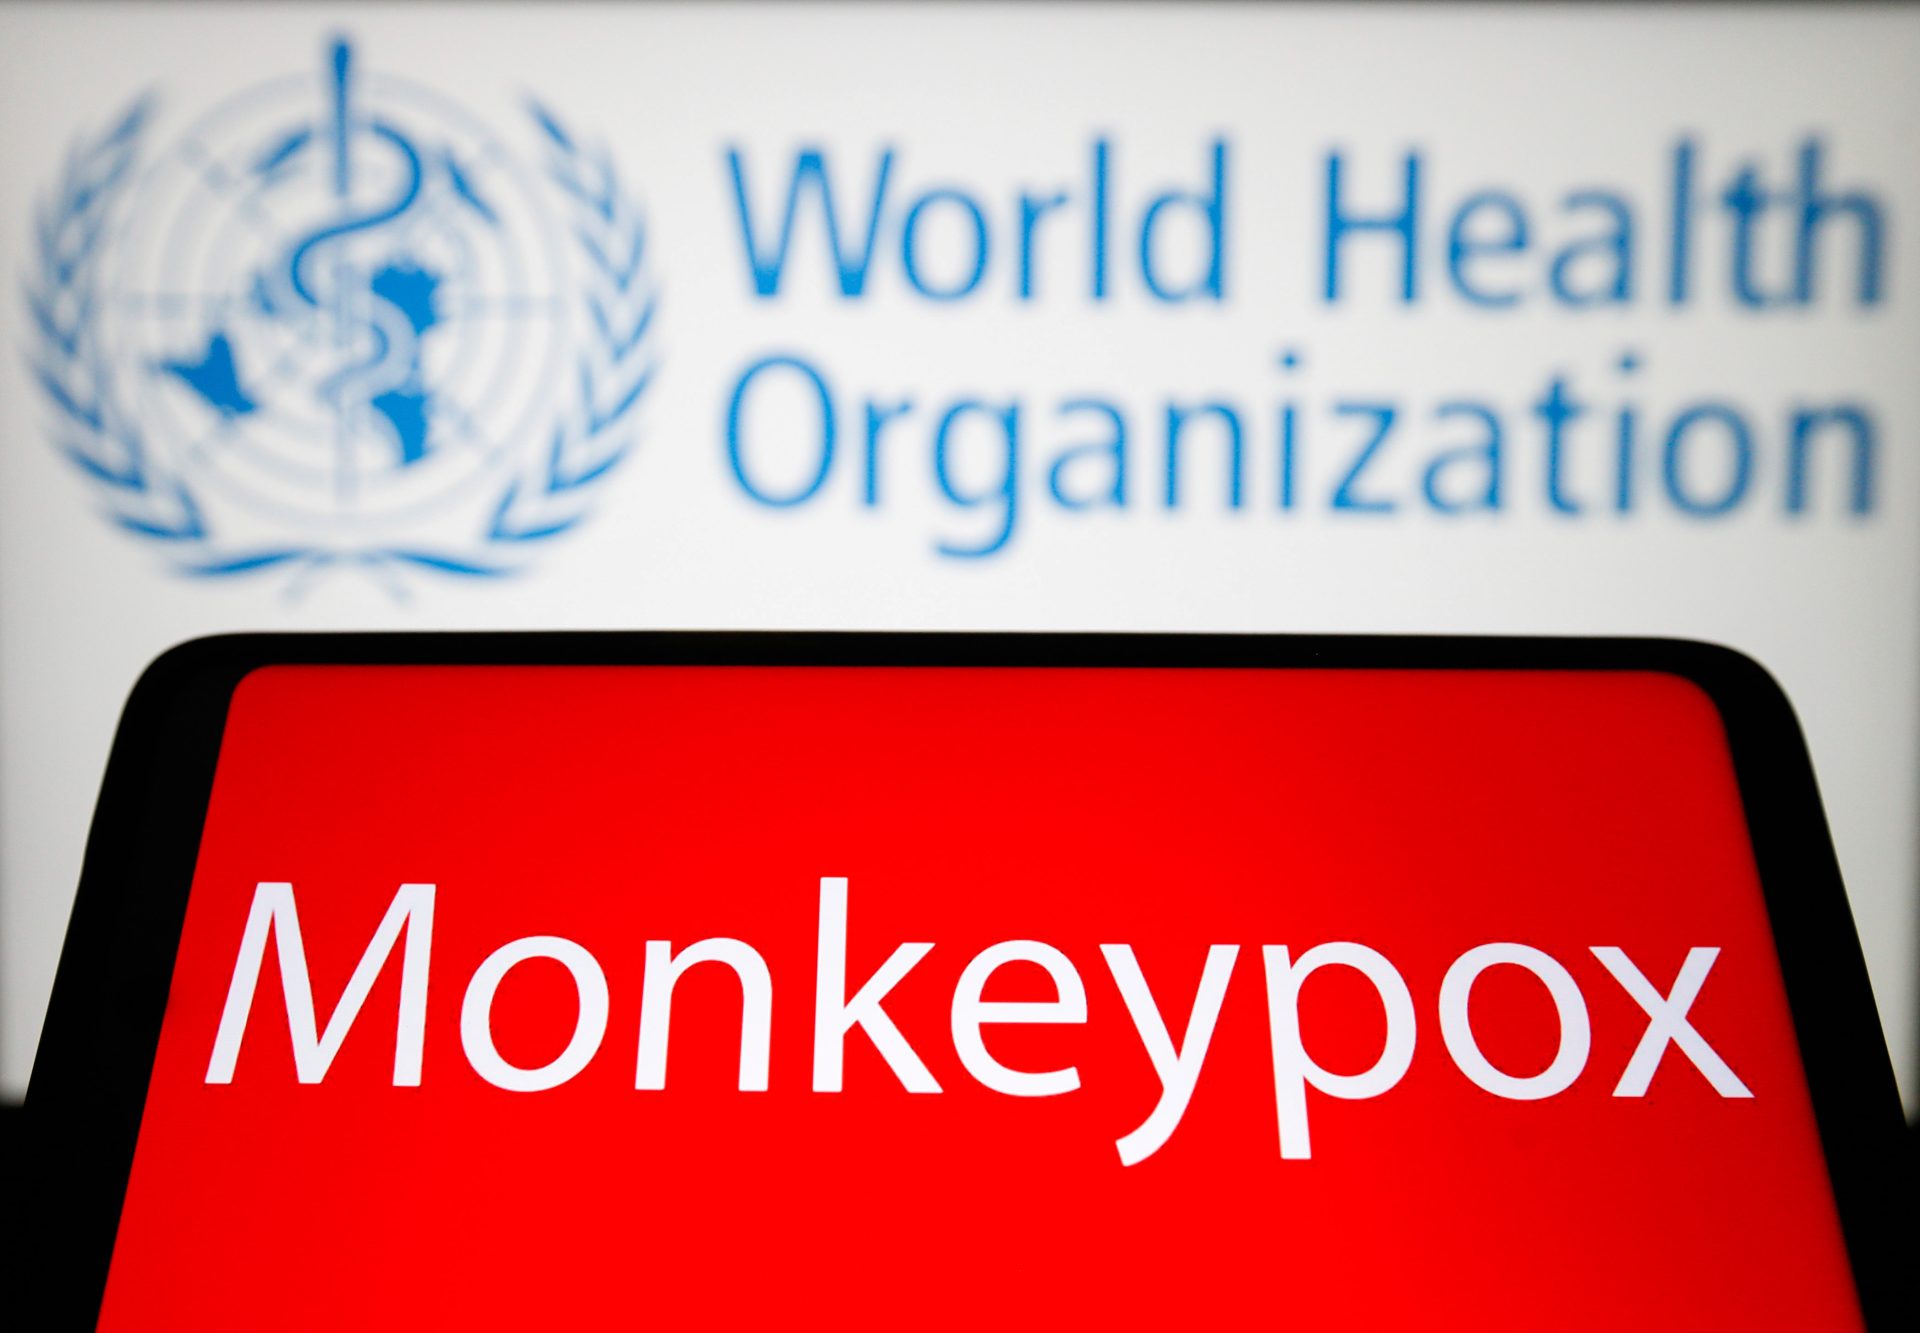 The World Health Organization’s adviser traces monkey cup outbreaks back to European raves, where gay men were intimate – “It seems that sexual contact has now intensified this transmission”